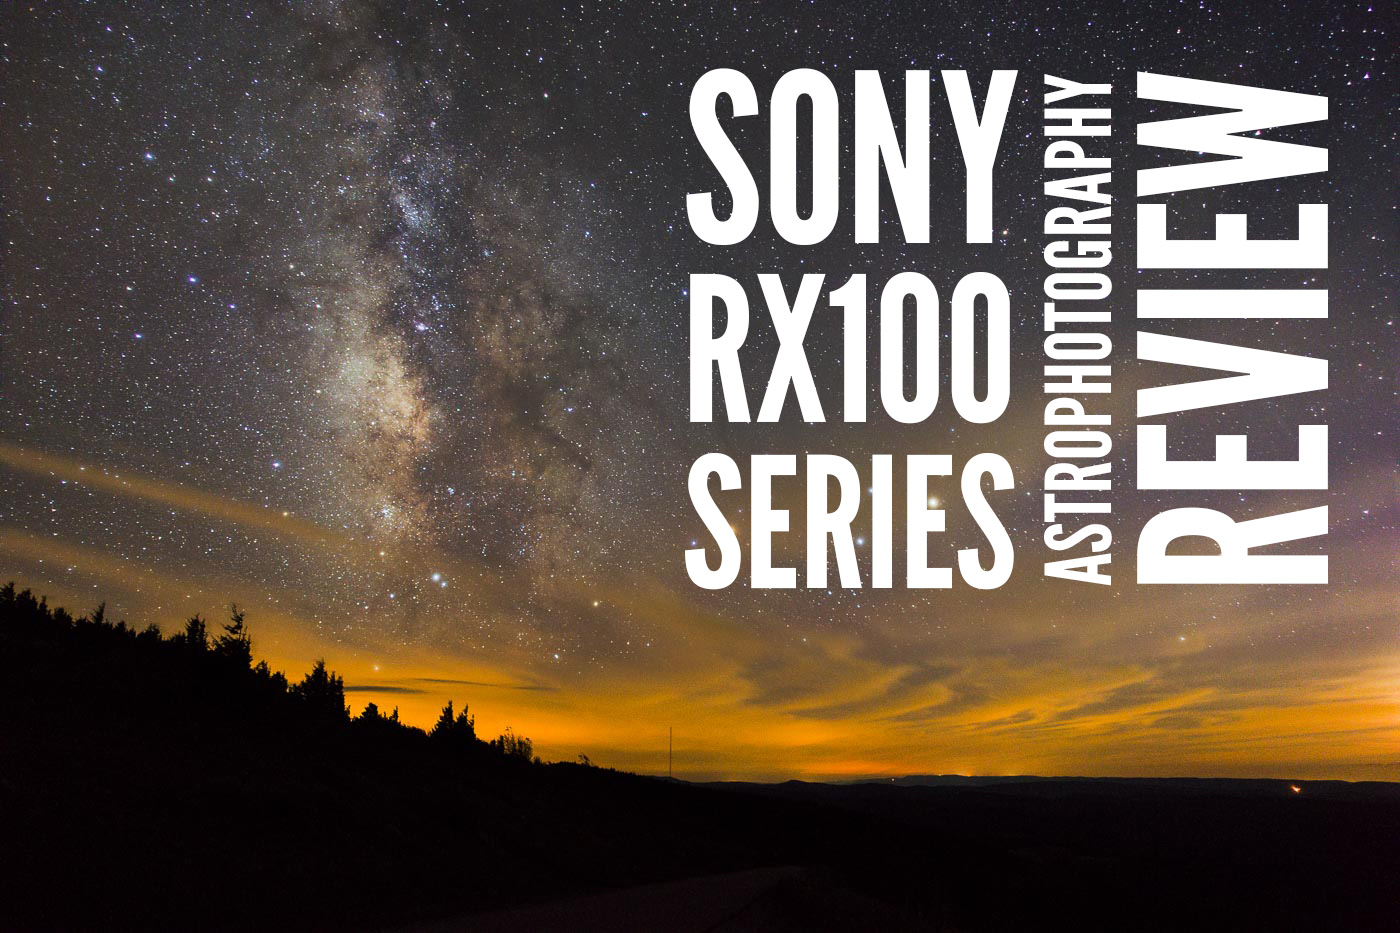 Sony RX100 Series Astrophotography Review